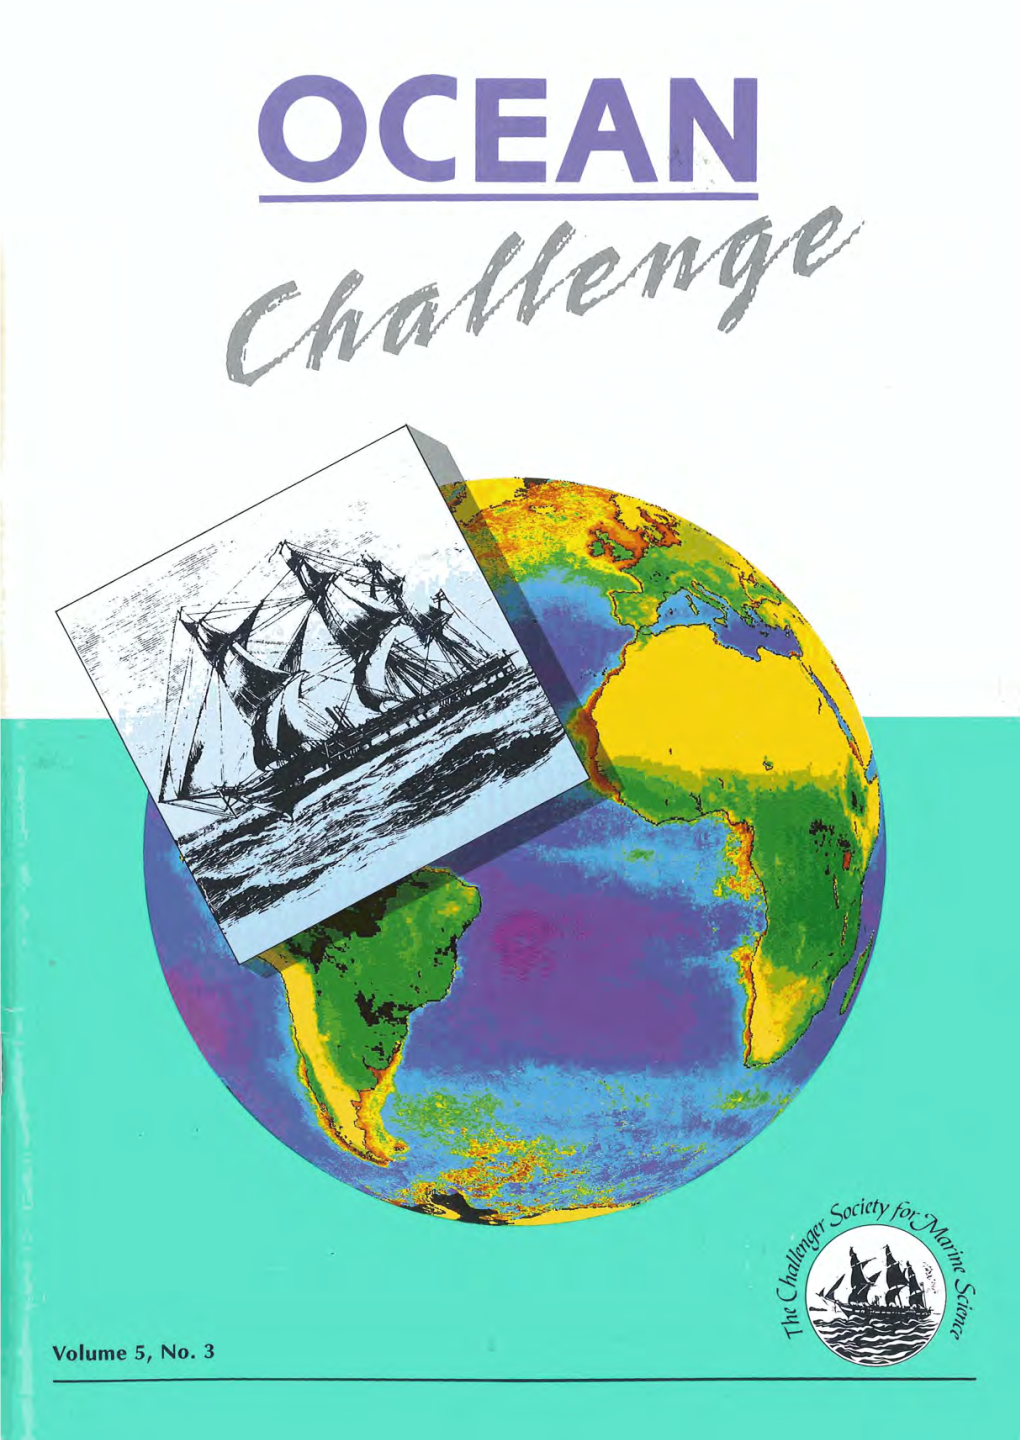 Ocean Challenge Aims to Keep Its Readers up to Date Ocean Challenge Is Published Three Times a Year